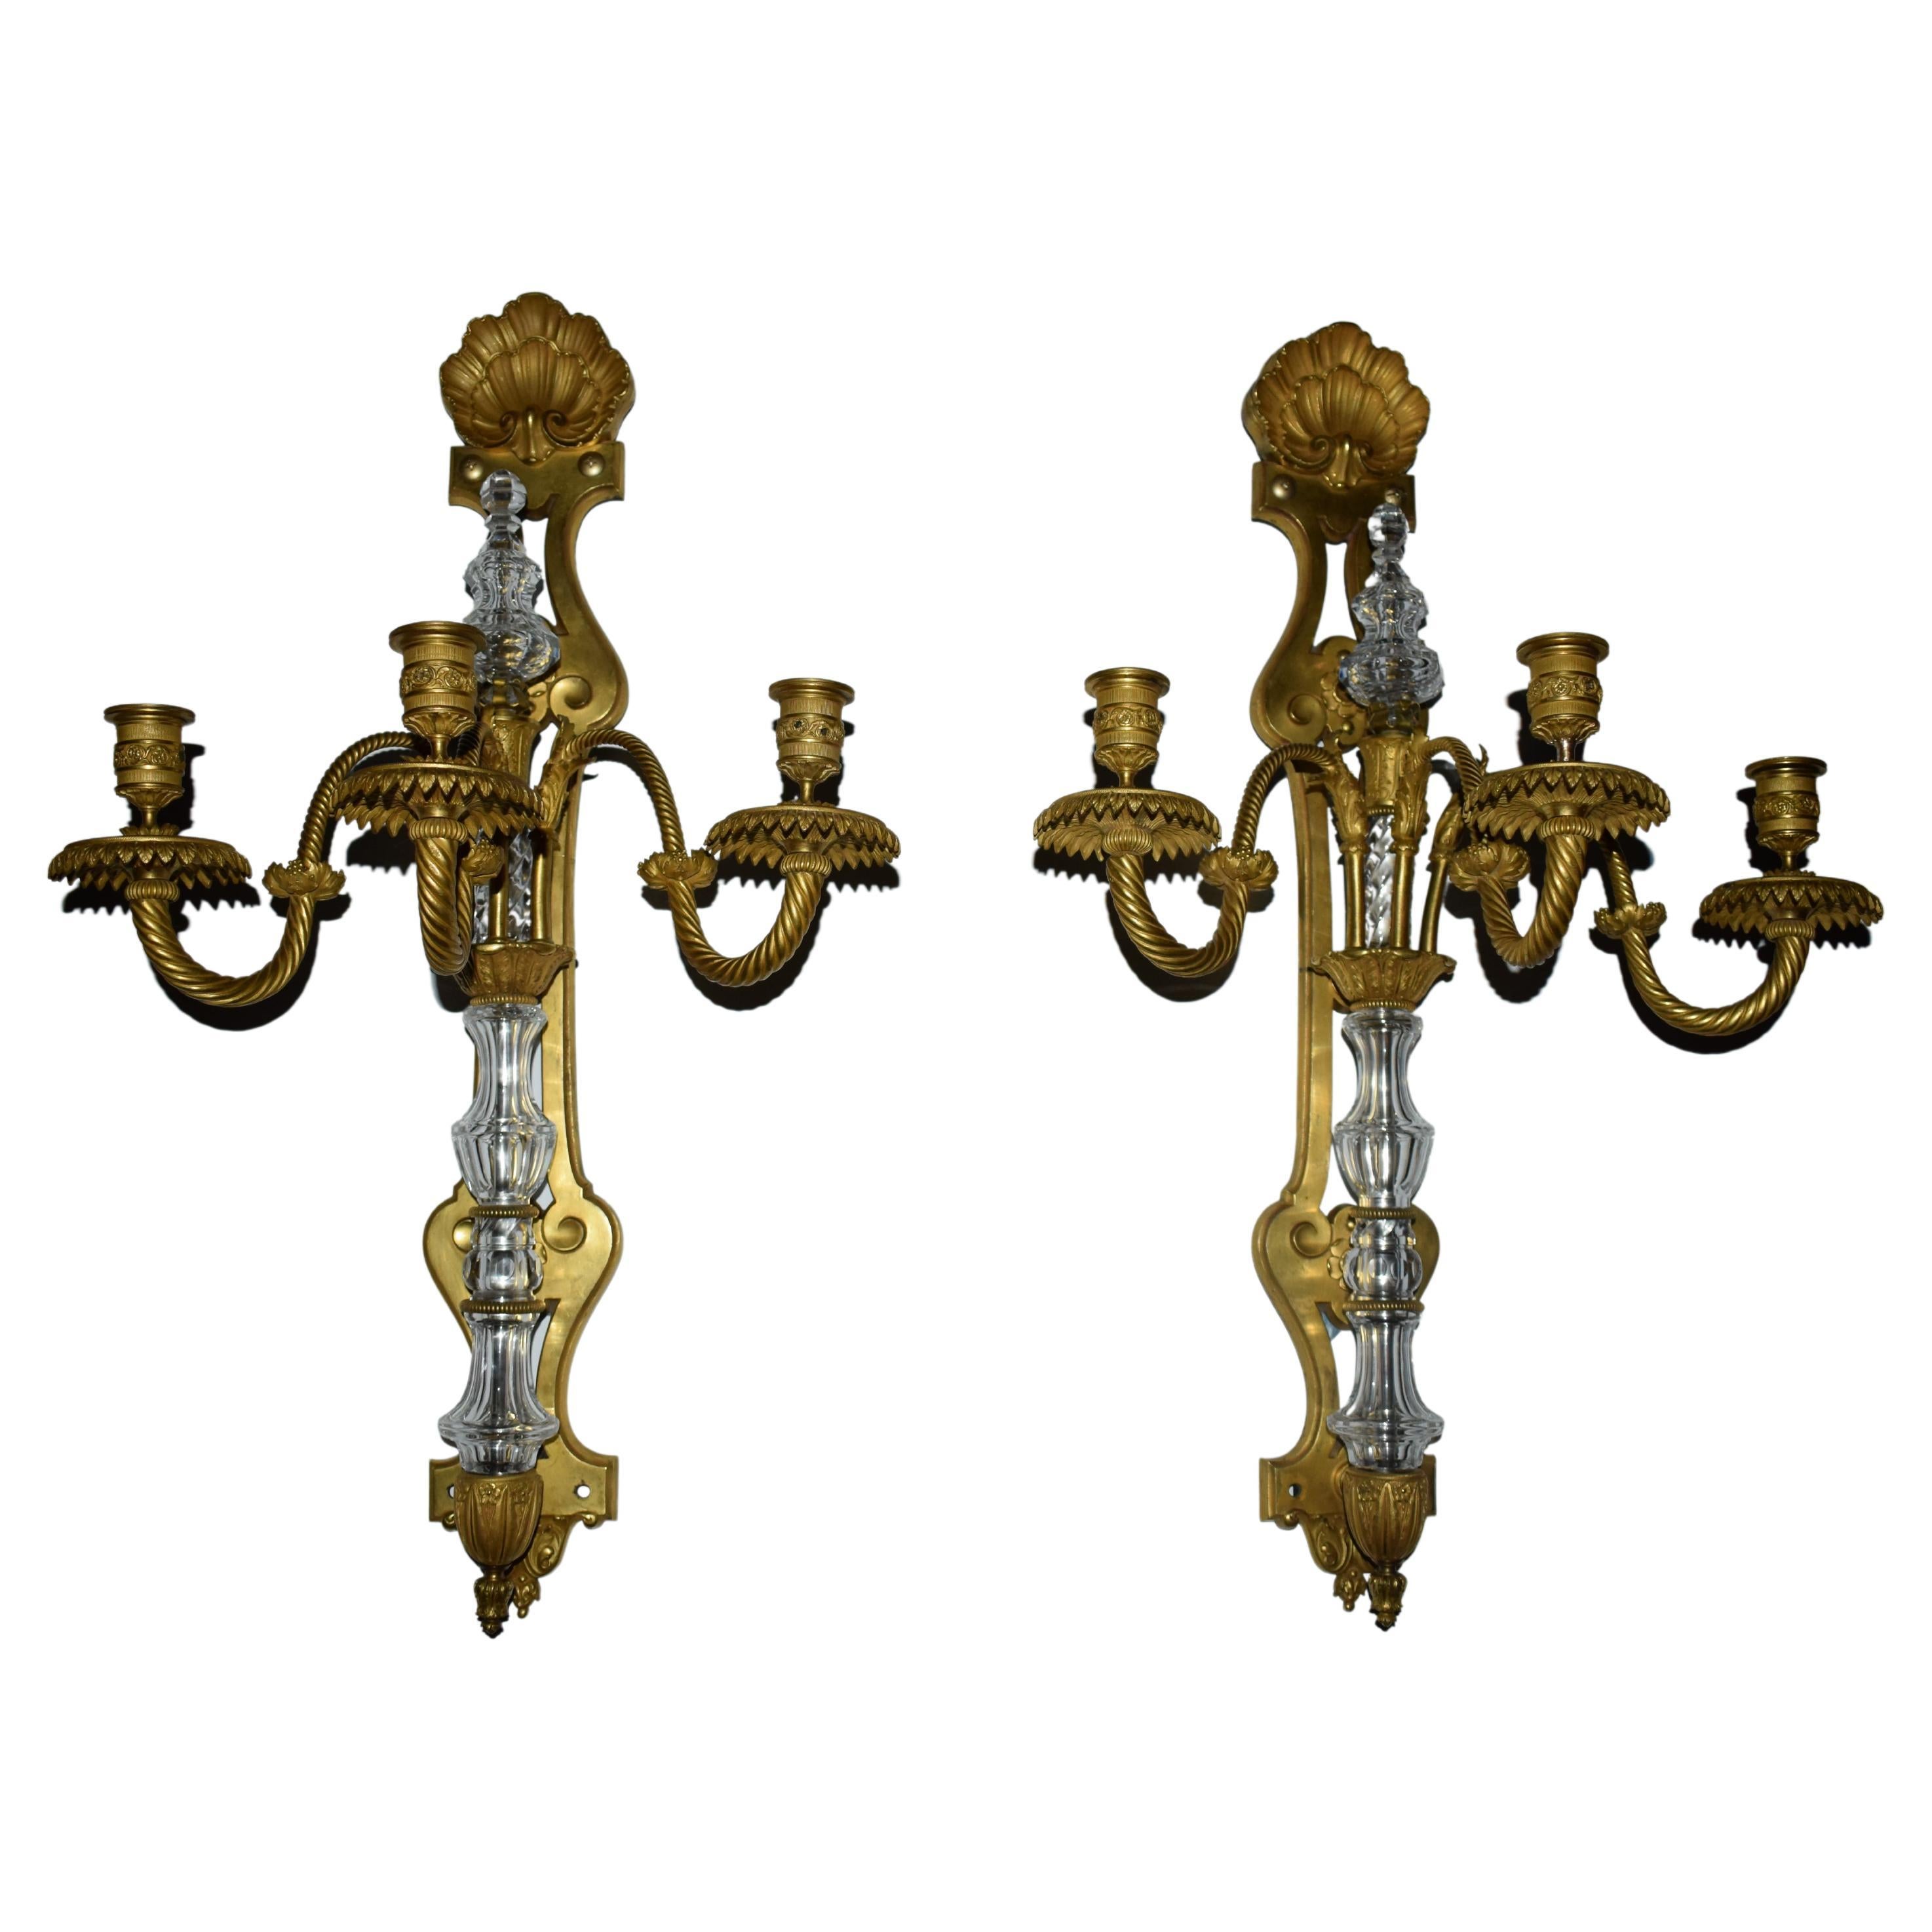 A Pair of Louis XVI style Wall Sconces